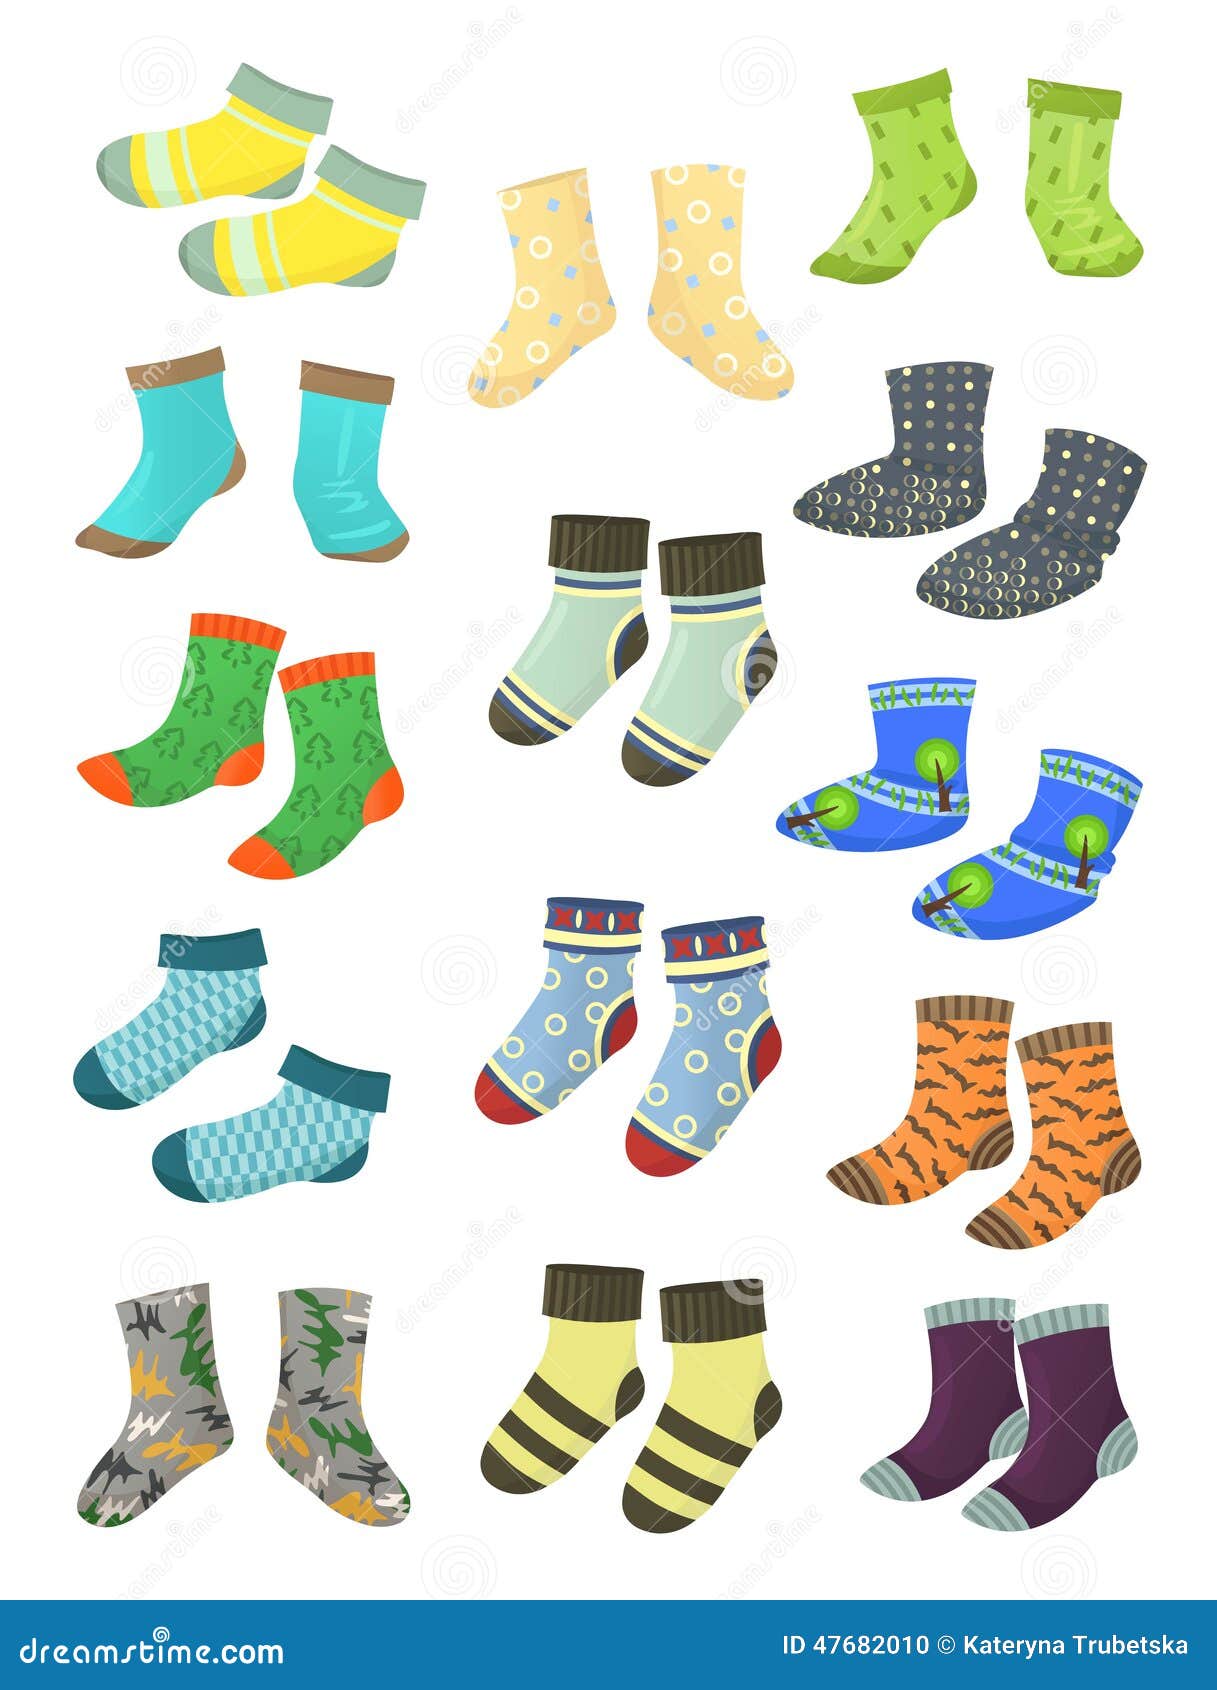 Socks Fabric, Wallpaper and Home Decor | Spoonflower